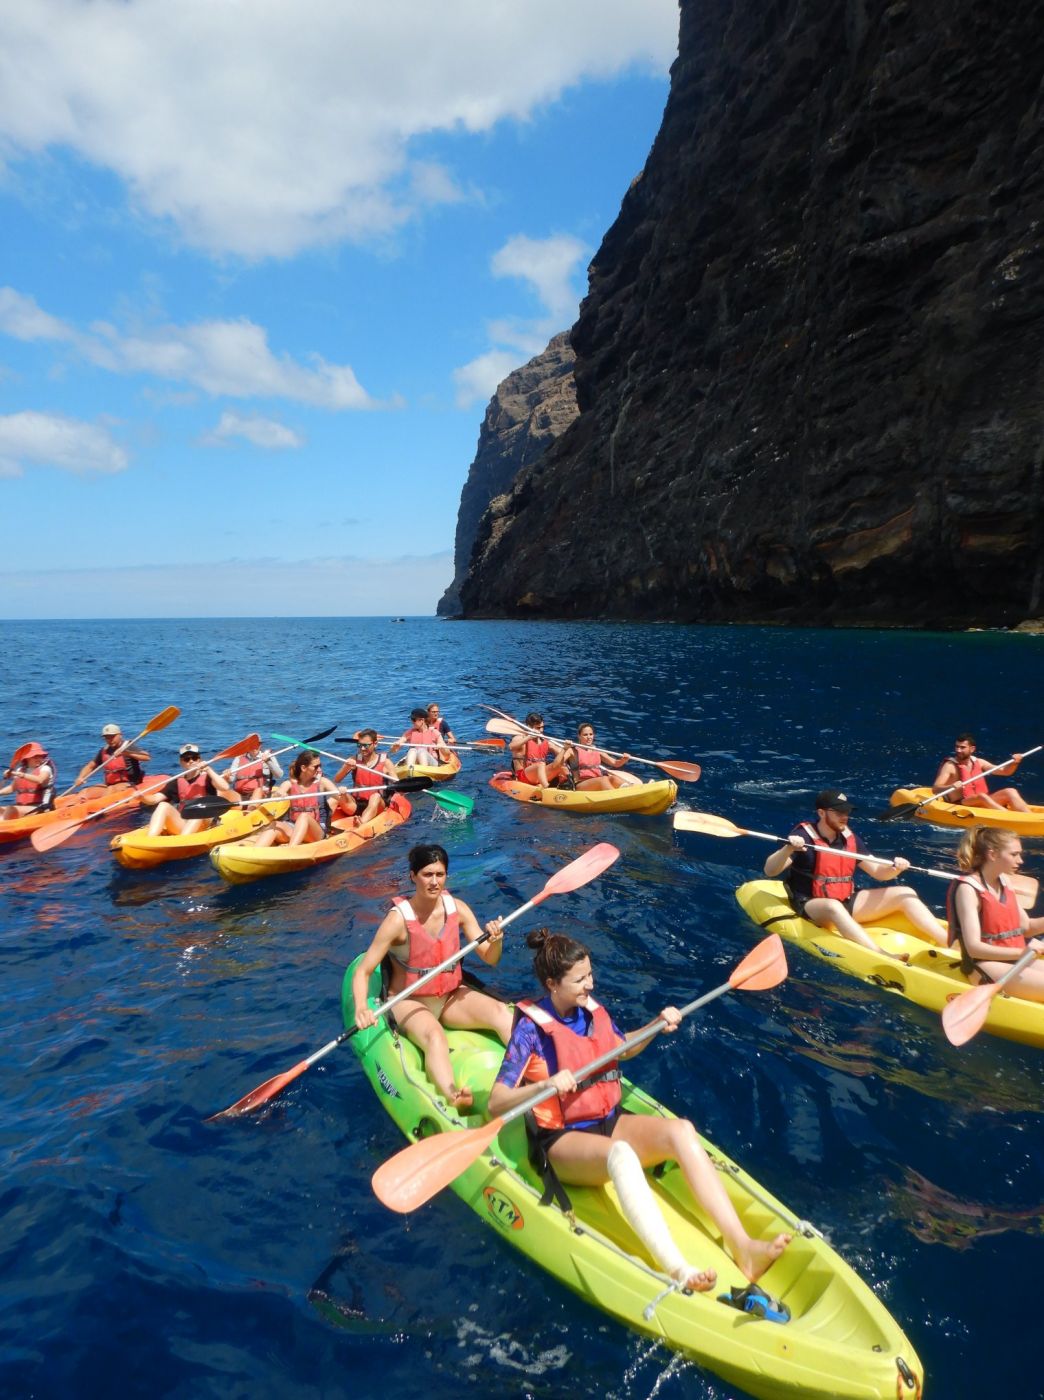 Back to Los Gigantes harbour in double kayaks